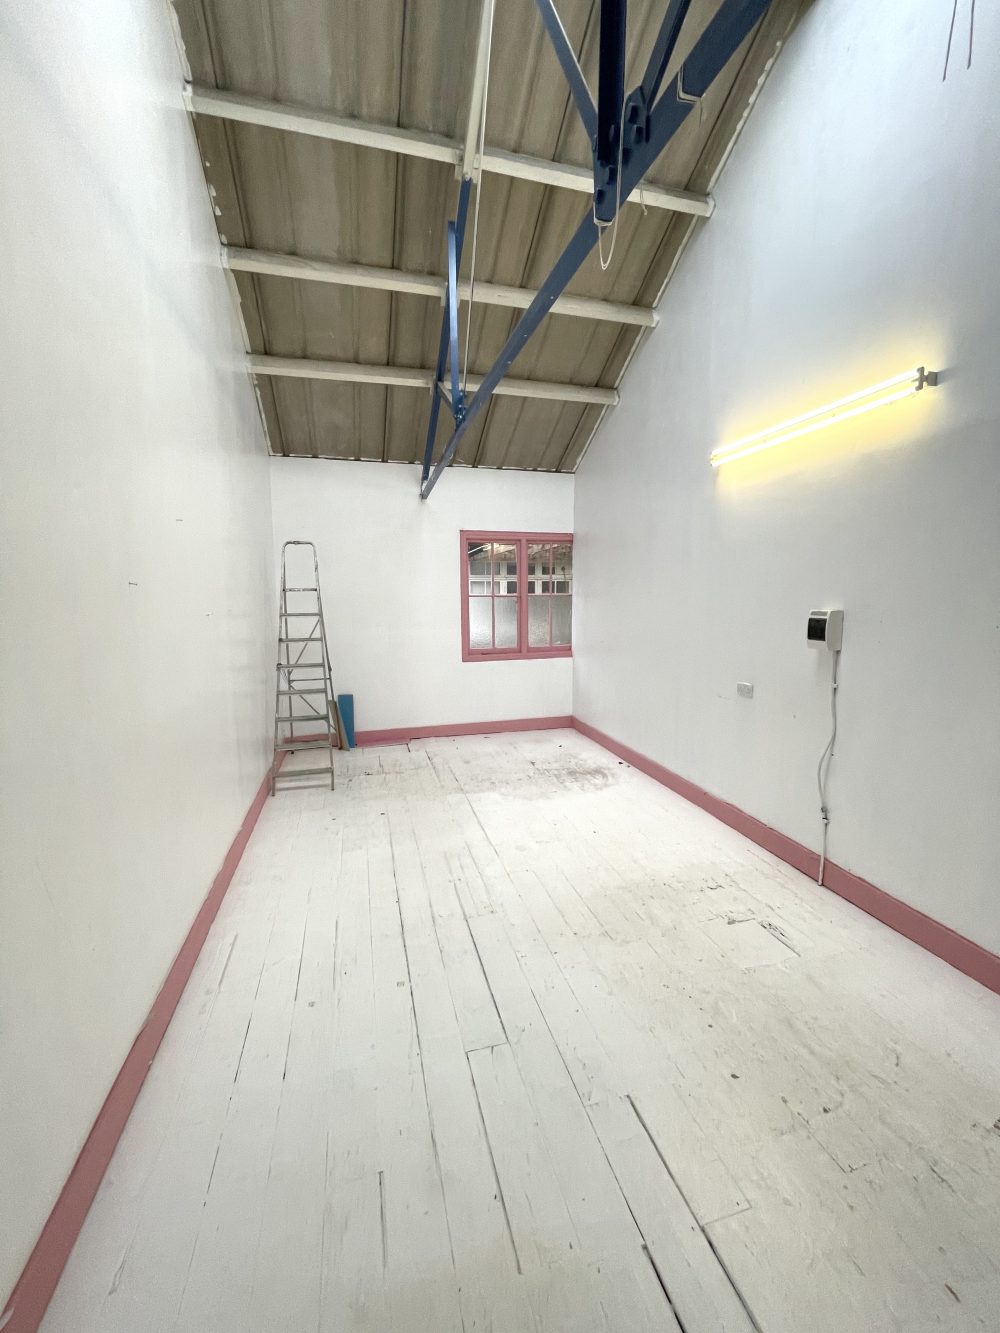 first floor light idustrial creative artist studio to rent in N16 Stoke Newington Shelford Place Pic5